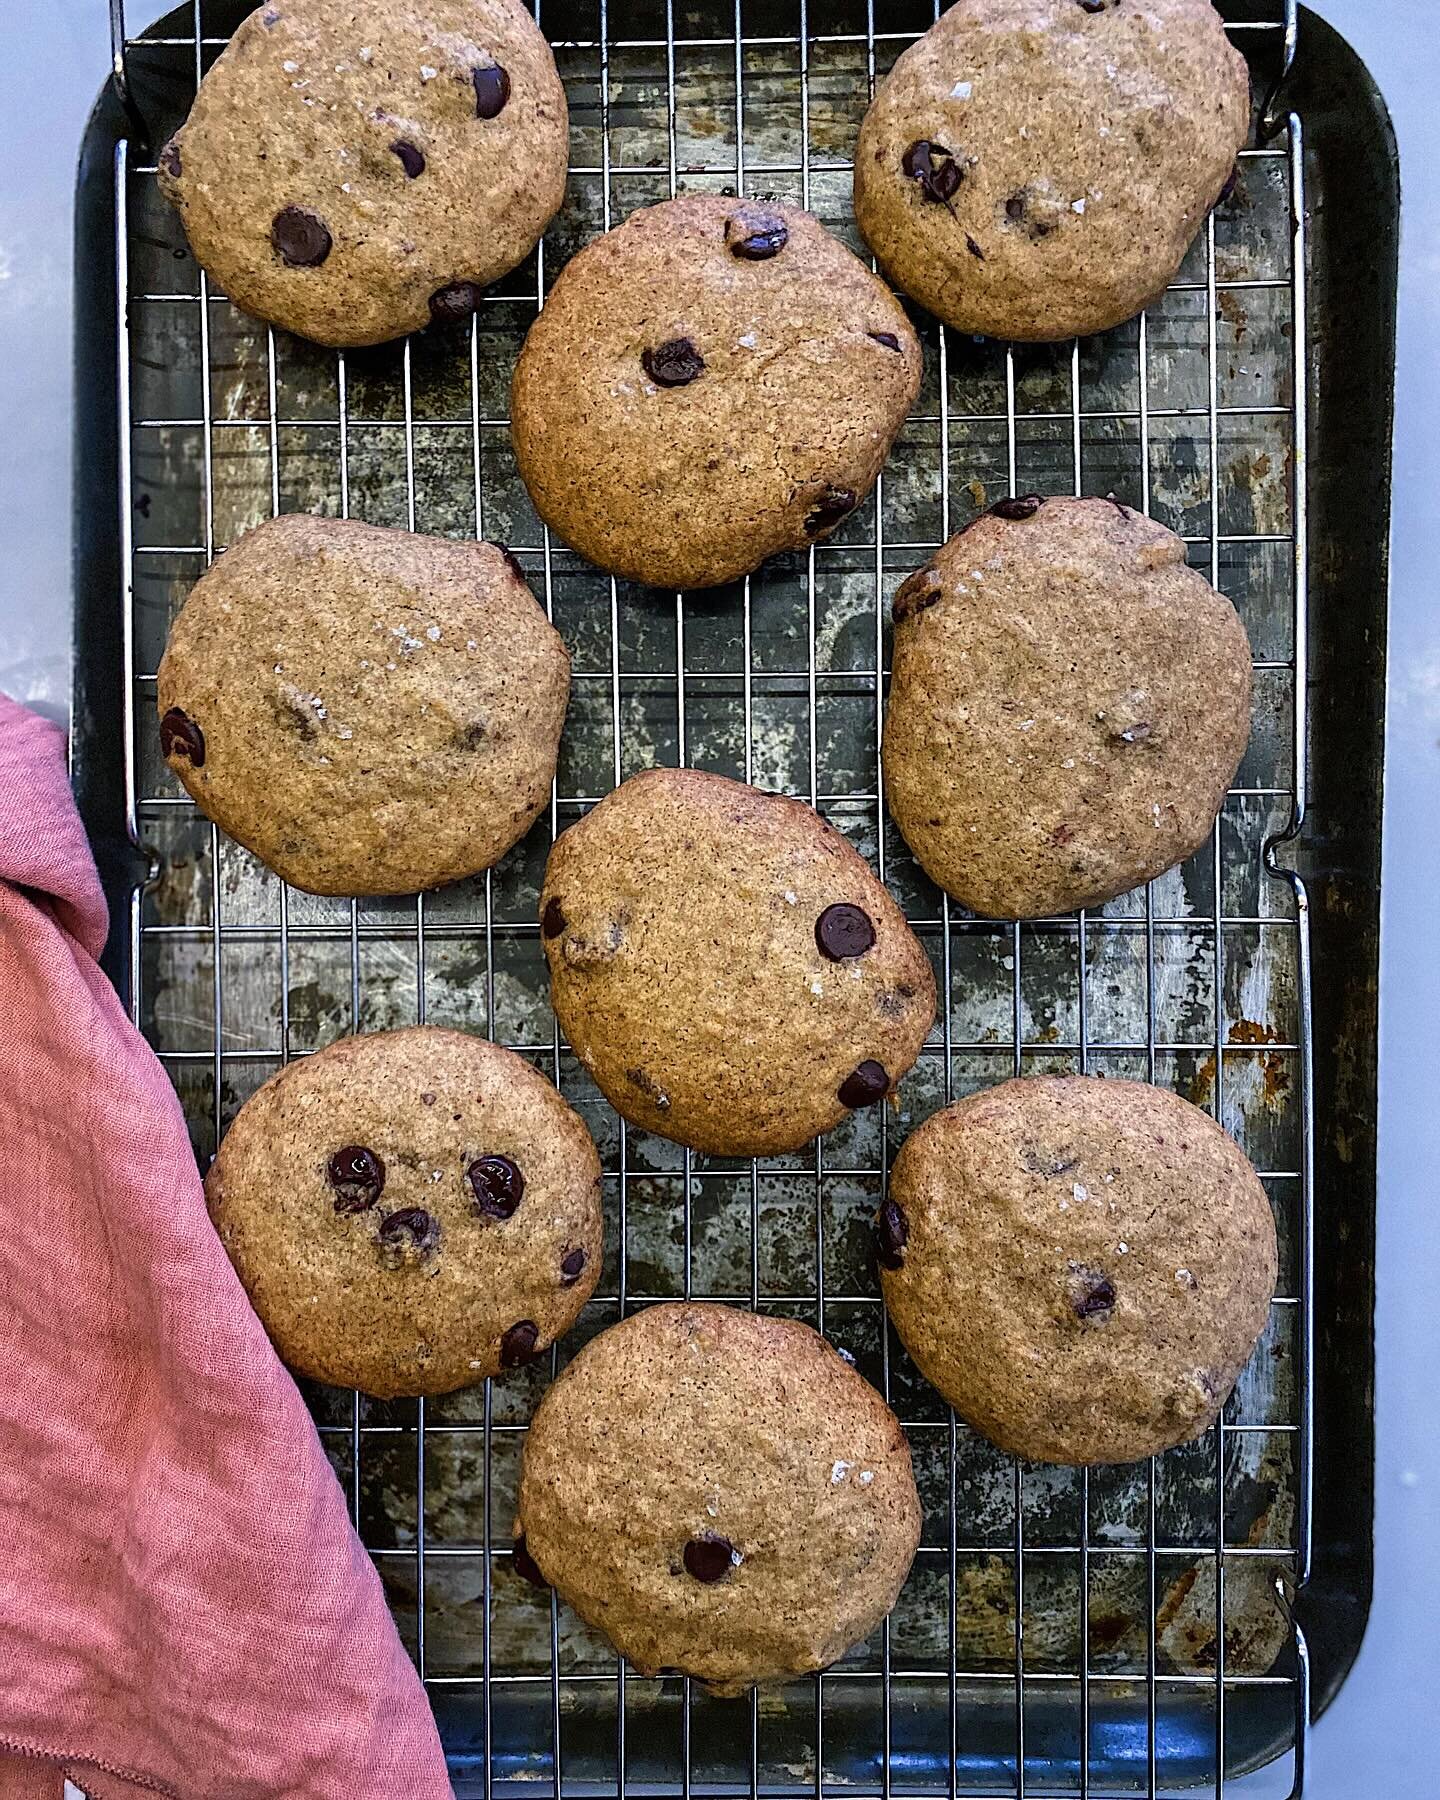 🍌🍫🍪Got some brown bananas lying around? 

Don&rsquo;t throw them out just yet! Try this mouthwatering Banana, olive oil, and chocolate chip cookie recipe that&rsquo;s vegan, gluten-free, and oh-so-chewy! 

Perfect for satisfying your sweet craving